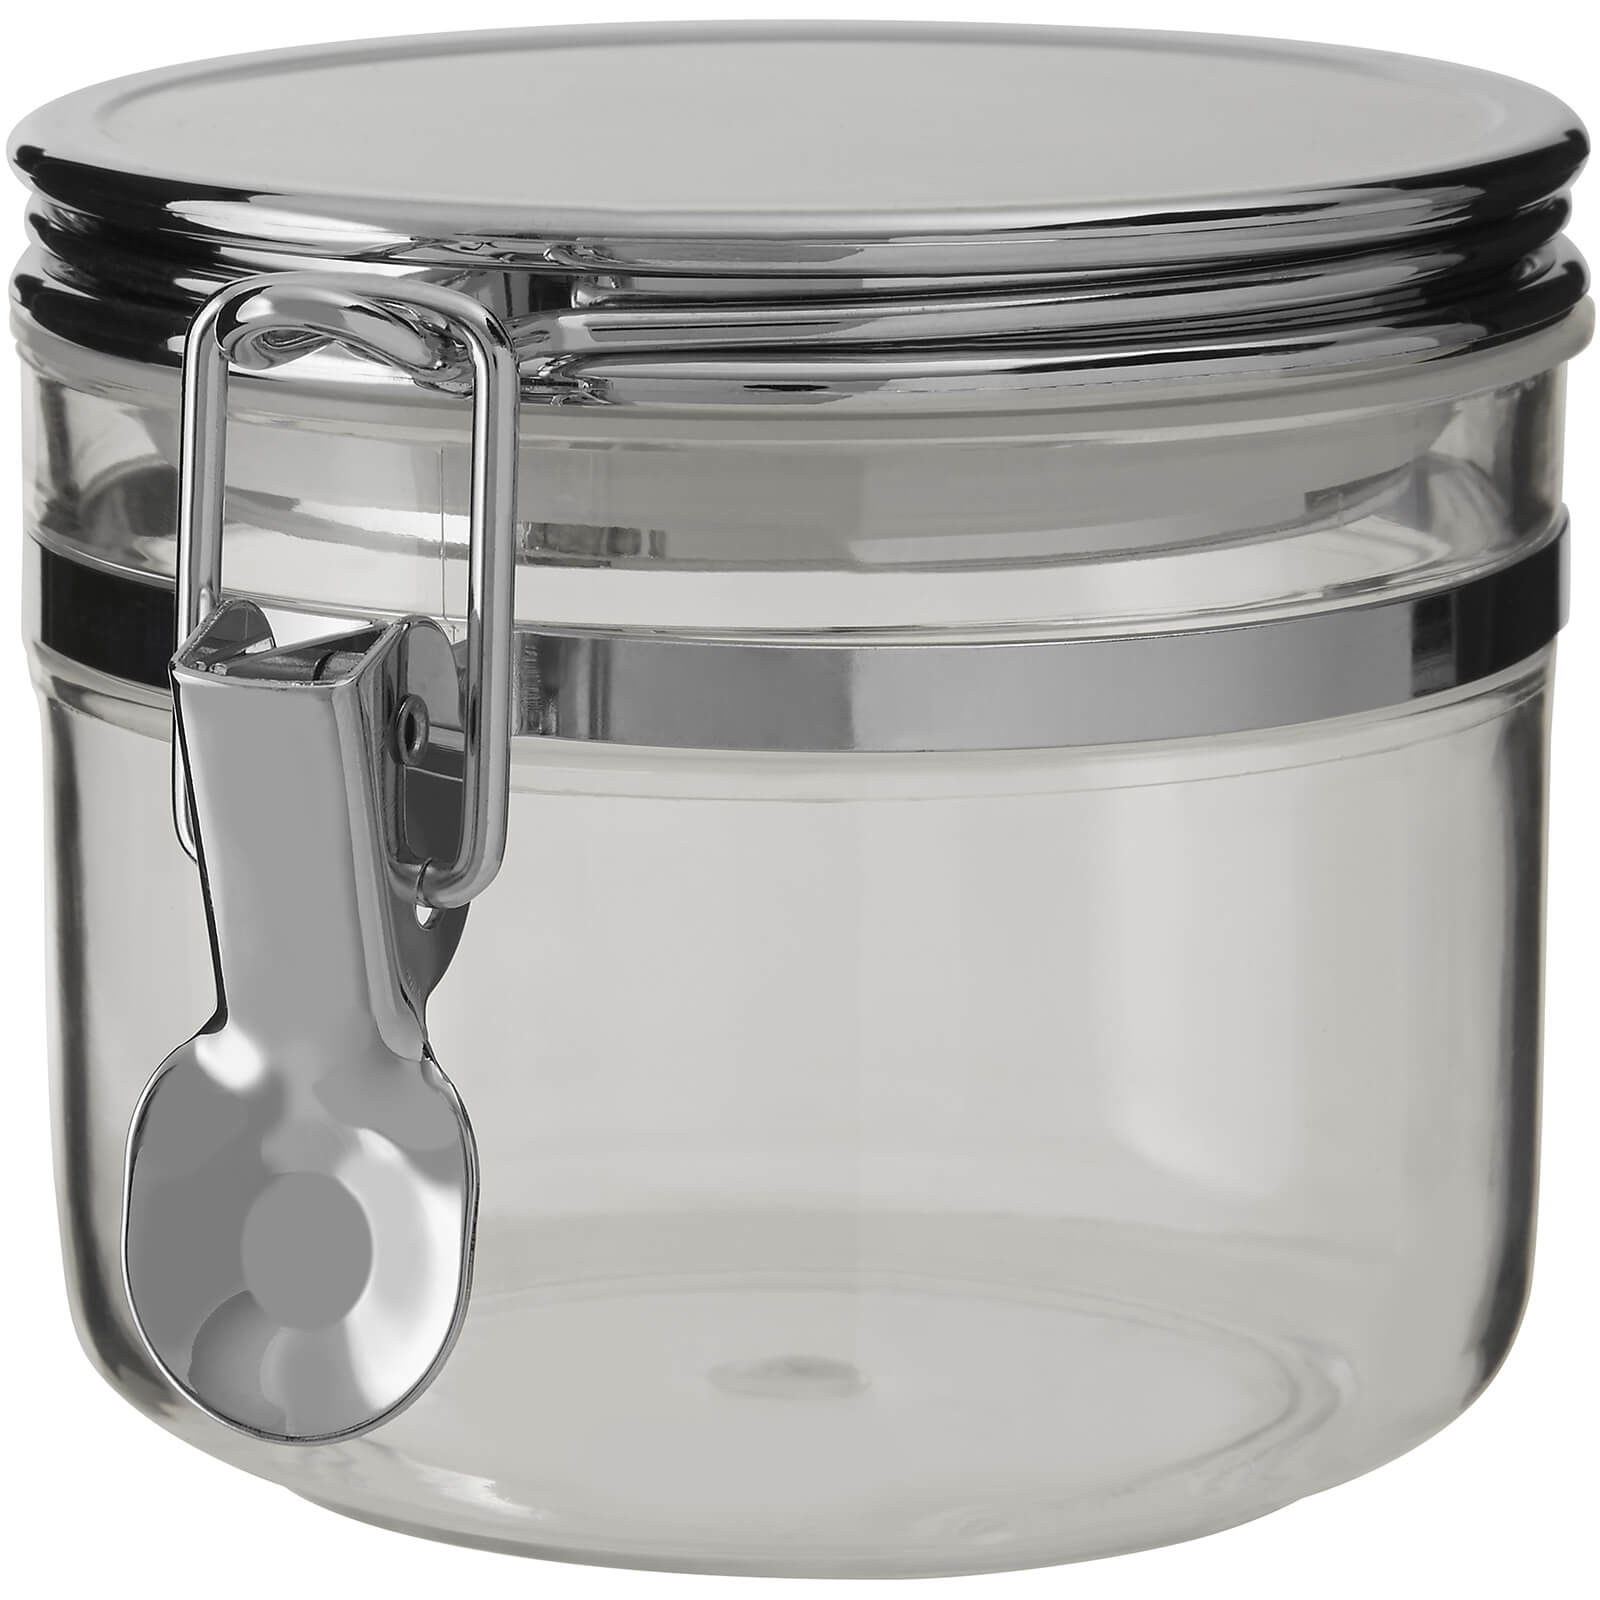 Image of Gozo Round Canister - Silver Finish Lid - Small